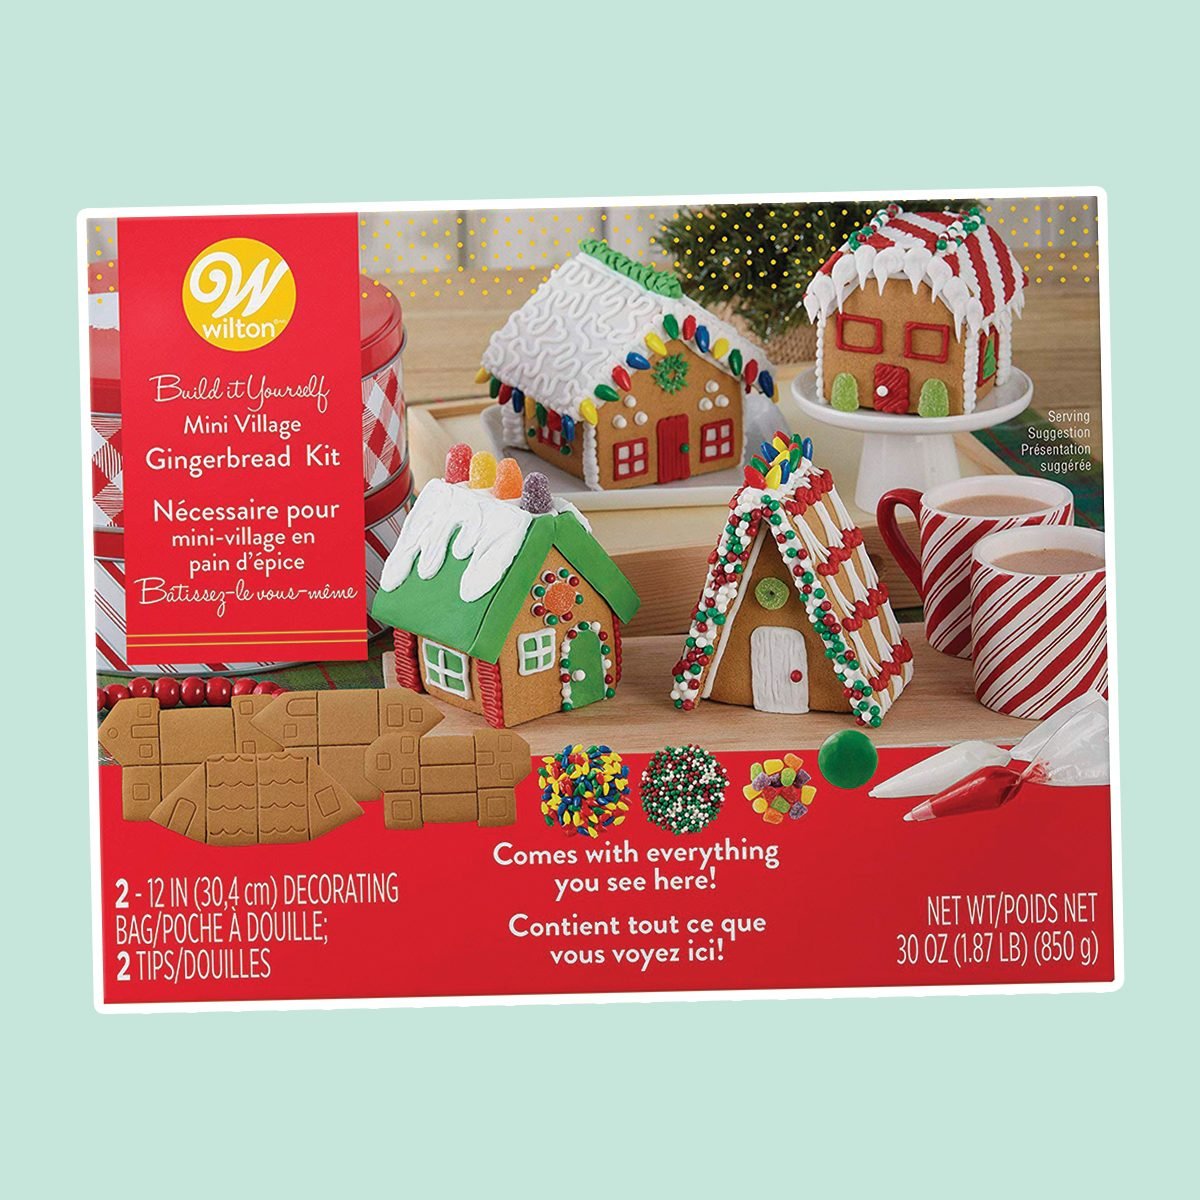 gingerbread house kit at costco